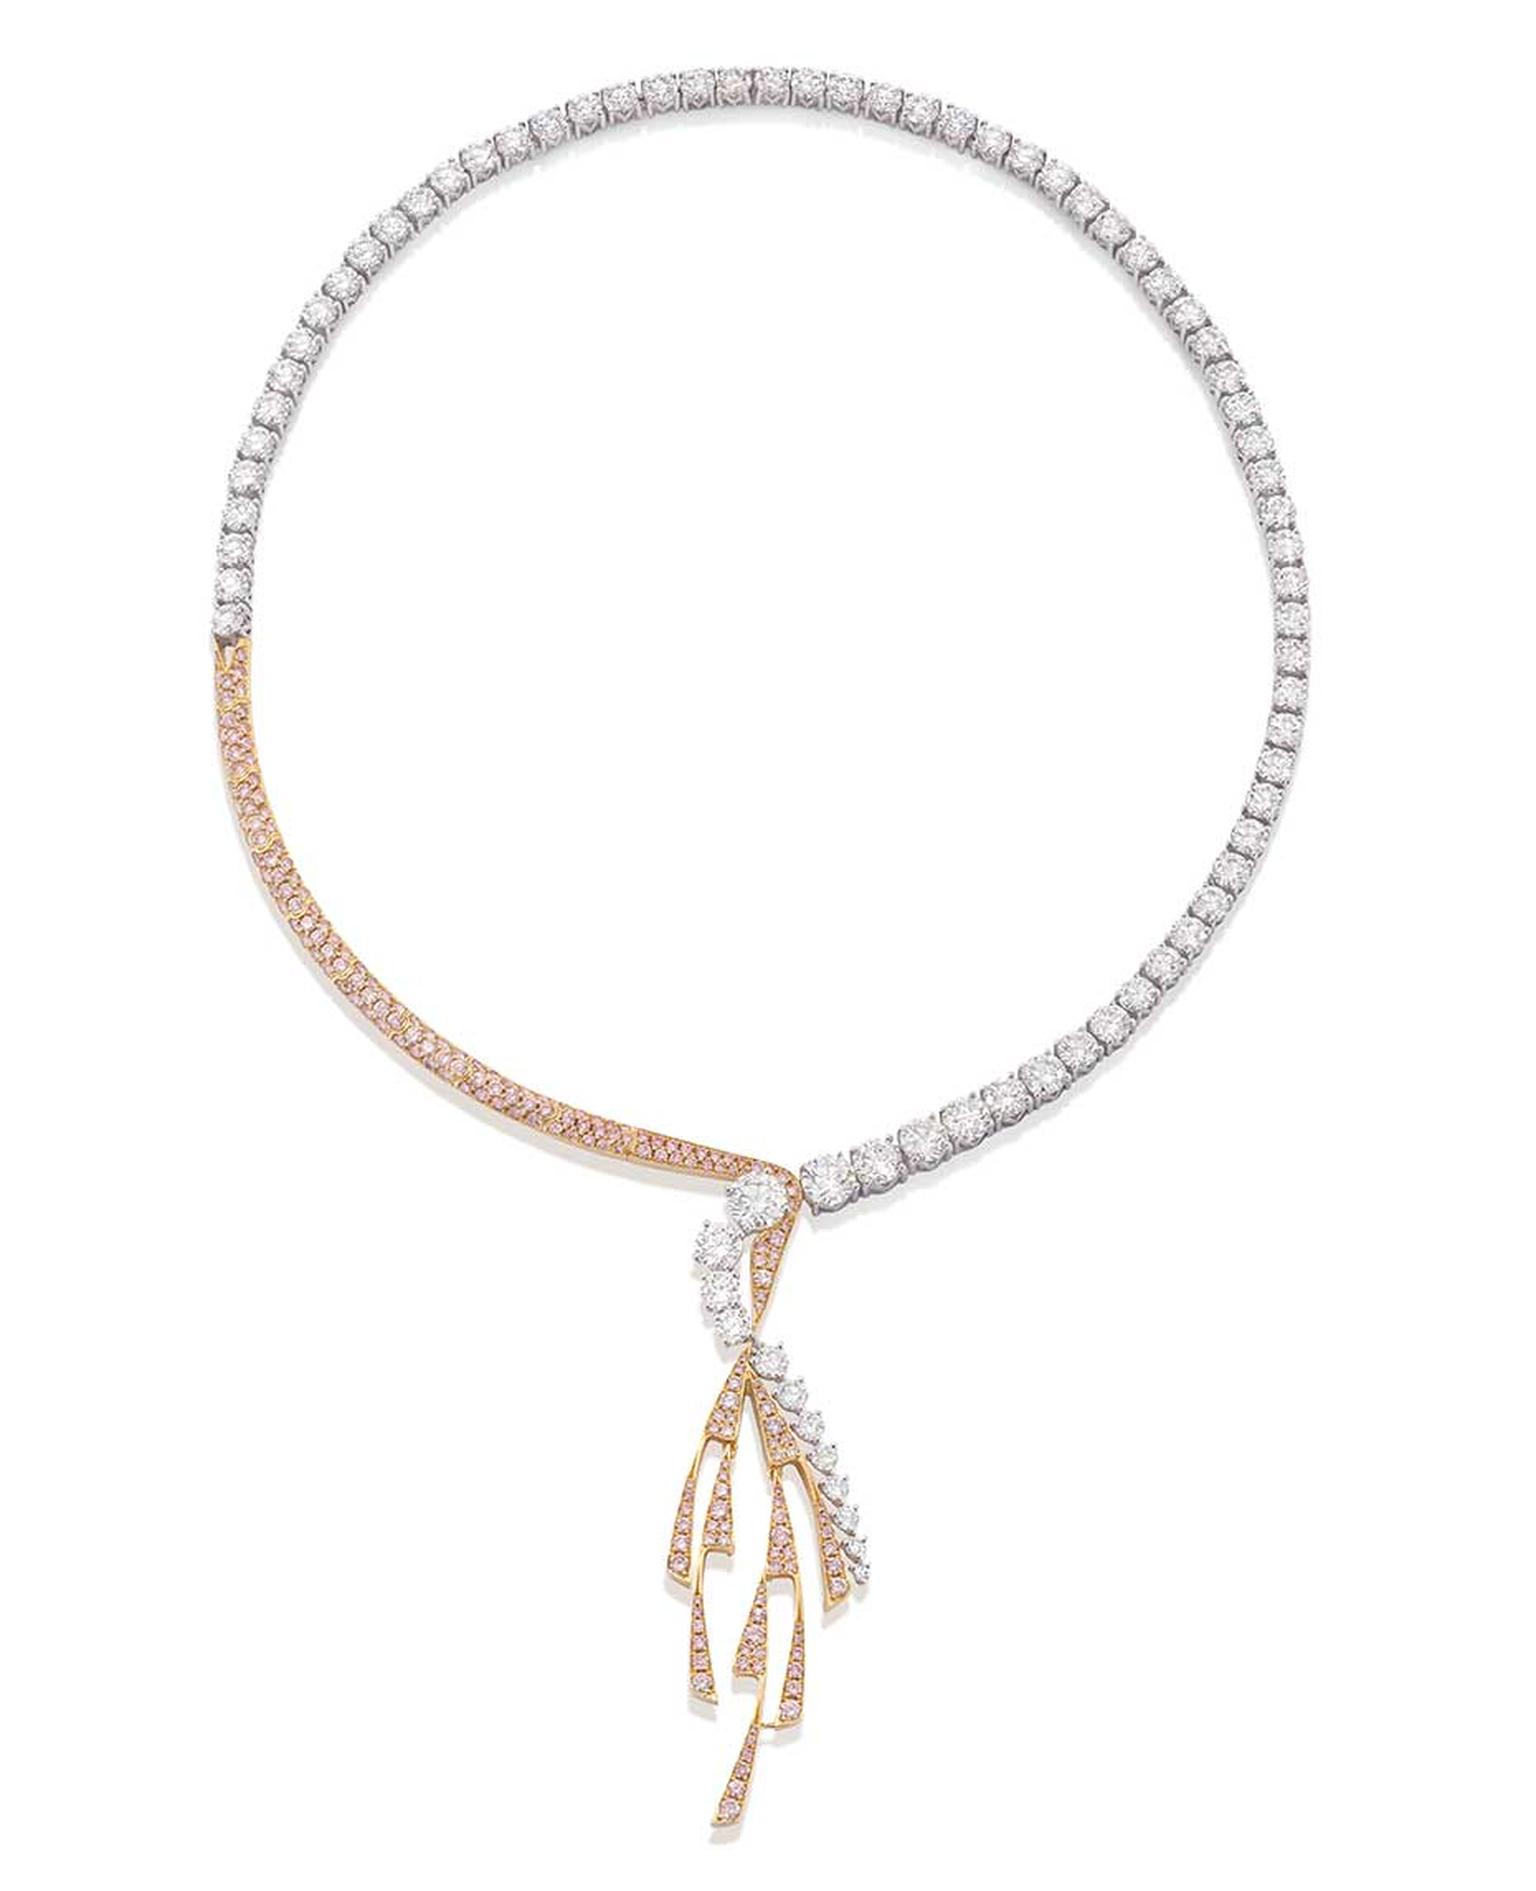 Boodles ‘Pas de Deux; Inspired by The Royal Ballet’ pink and white diamond necklace (£POA).